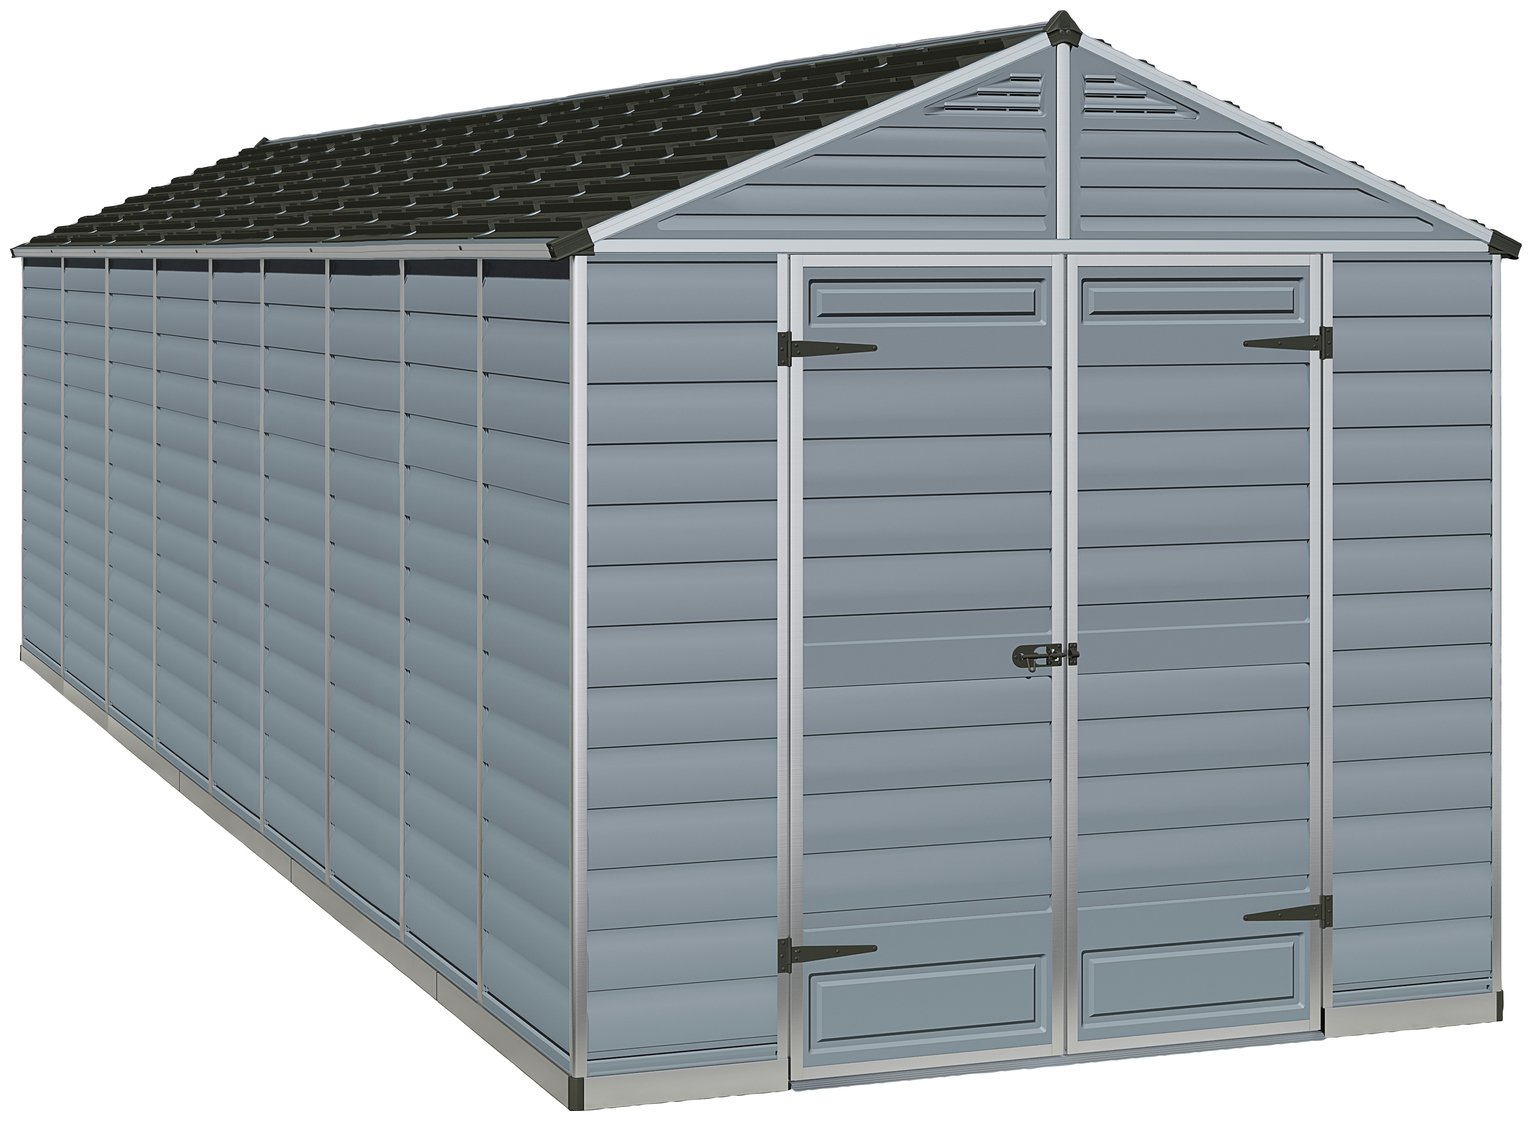 Palram Skylight Plastic 8 x 20ft Shed review